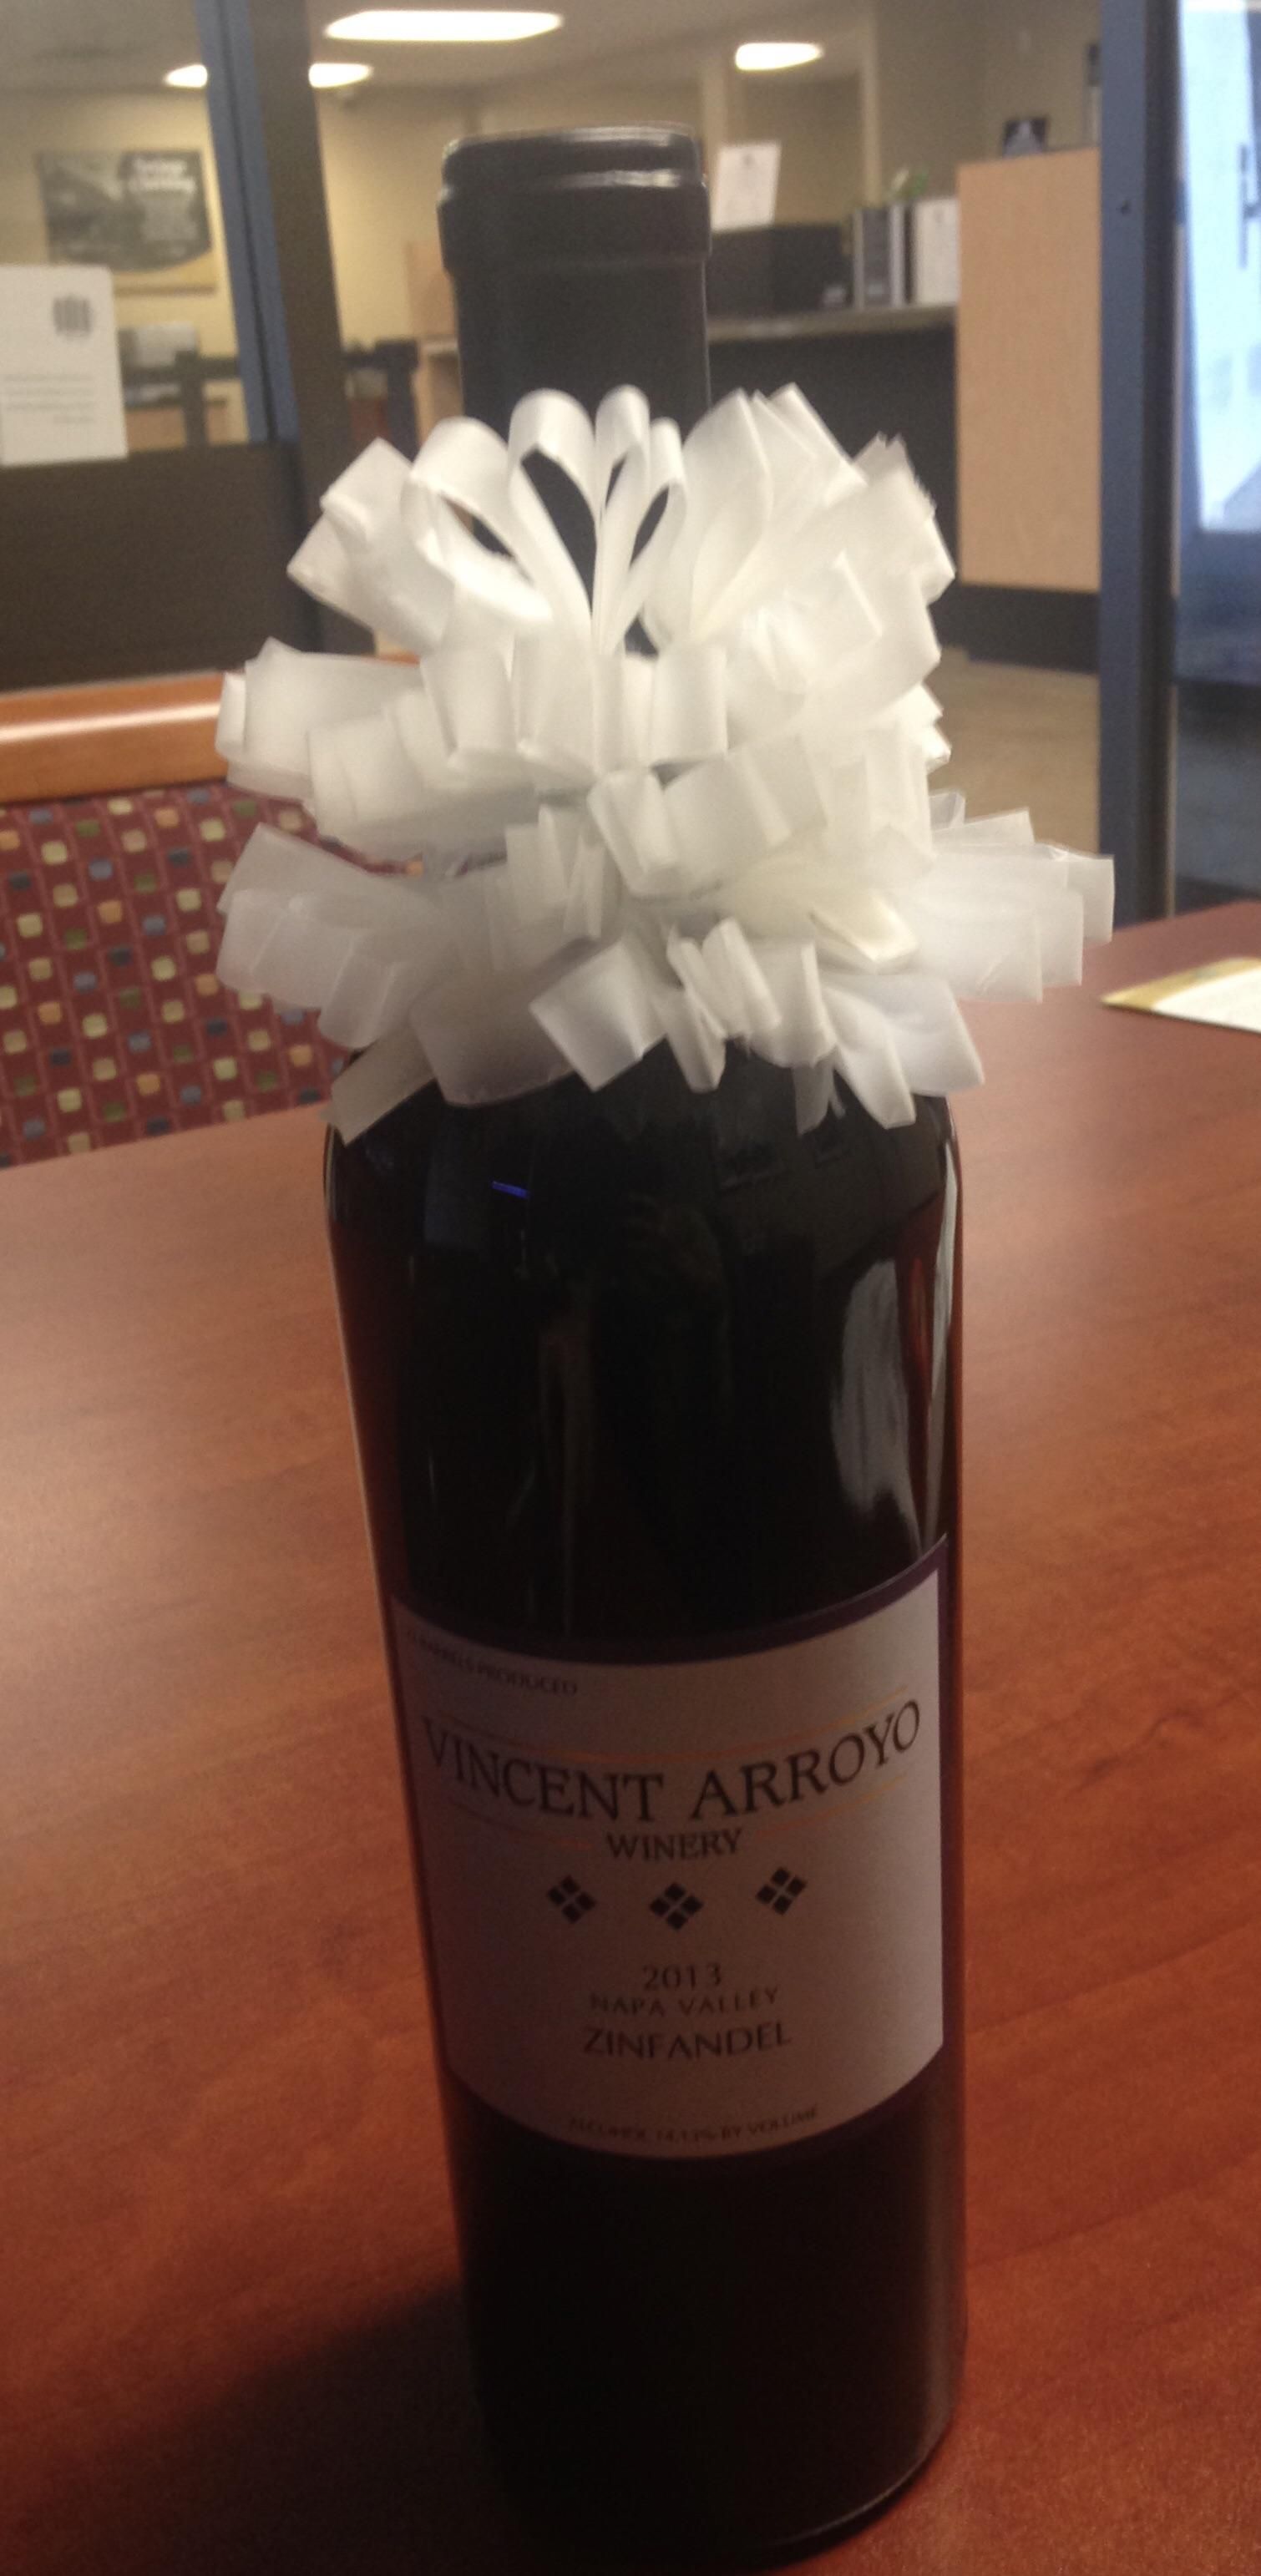 My boss HATES scotch tape and loves wine. This was my retirement gift for him